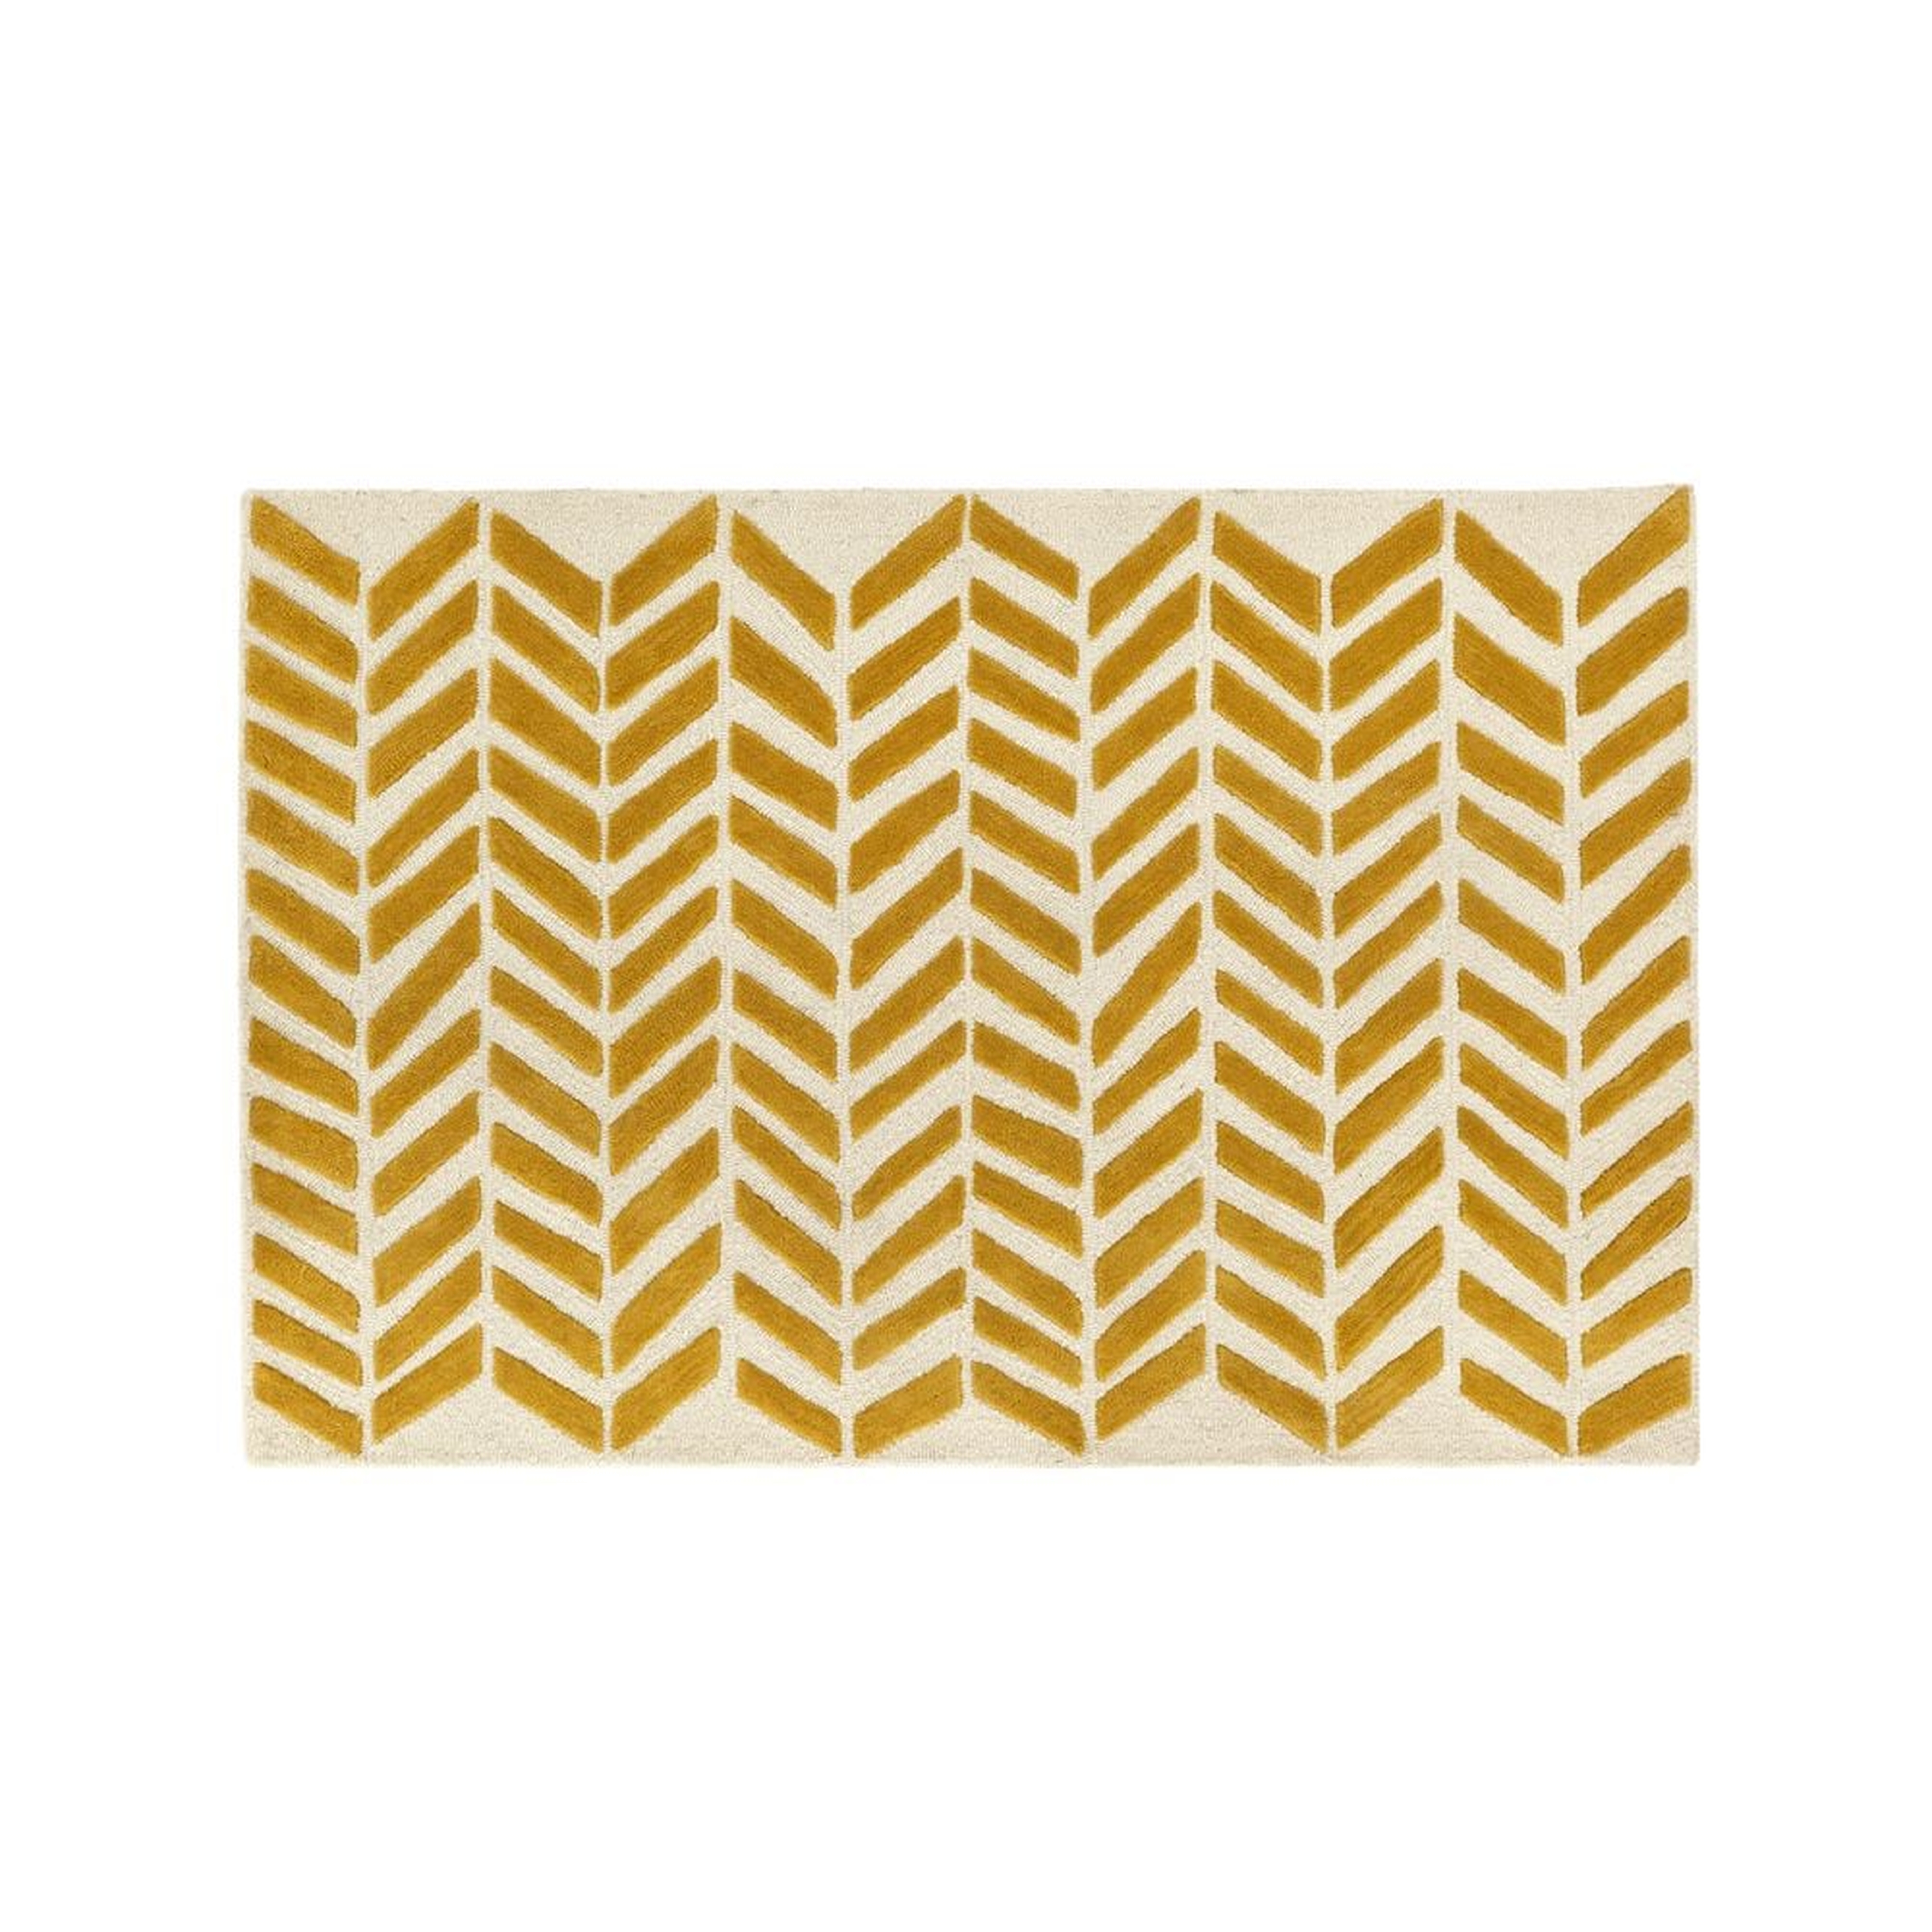 5x8' Yellow Chevron Rug - Crate and Barrel